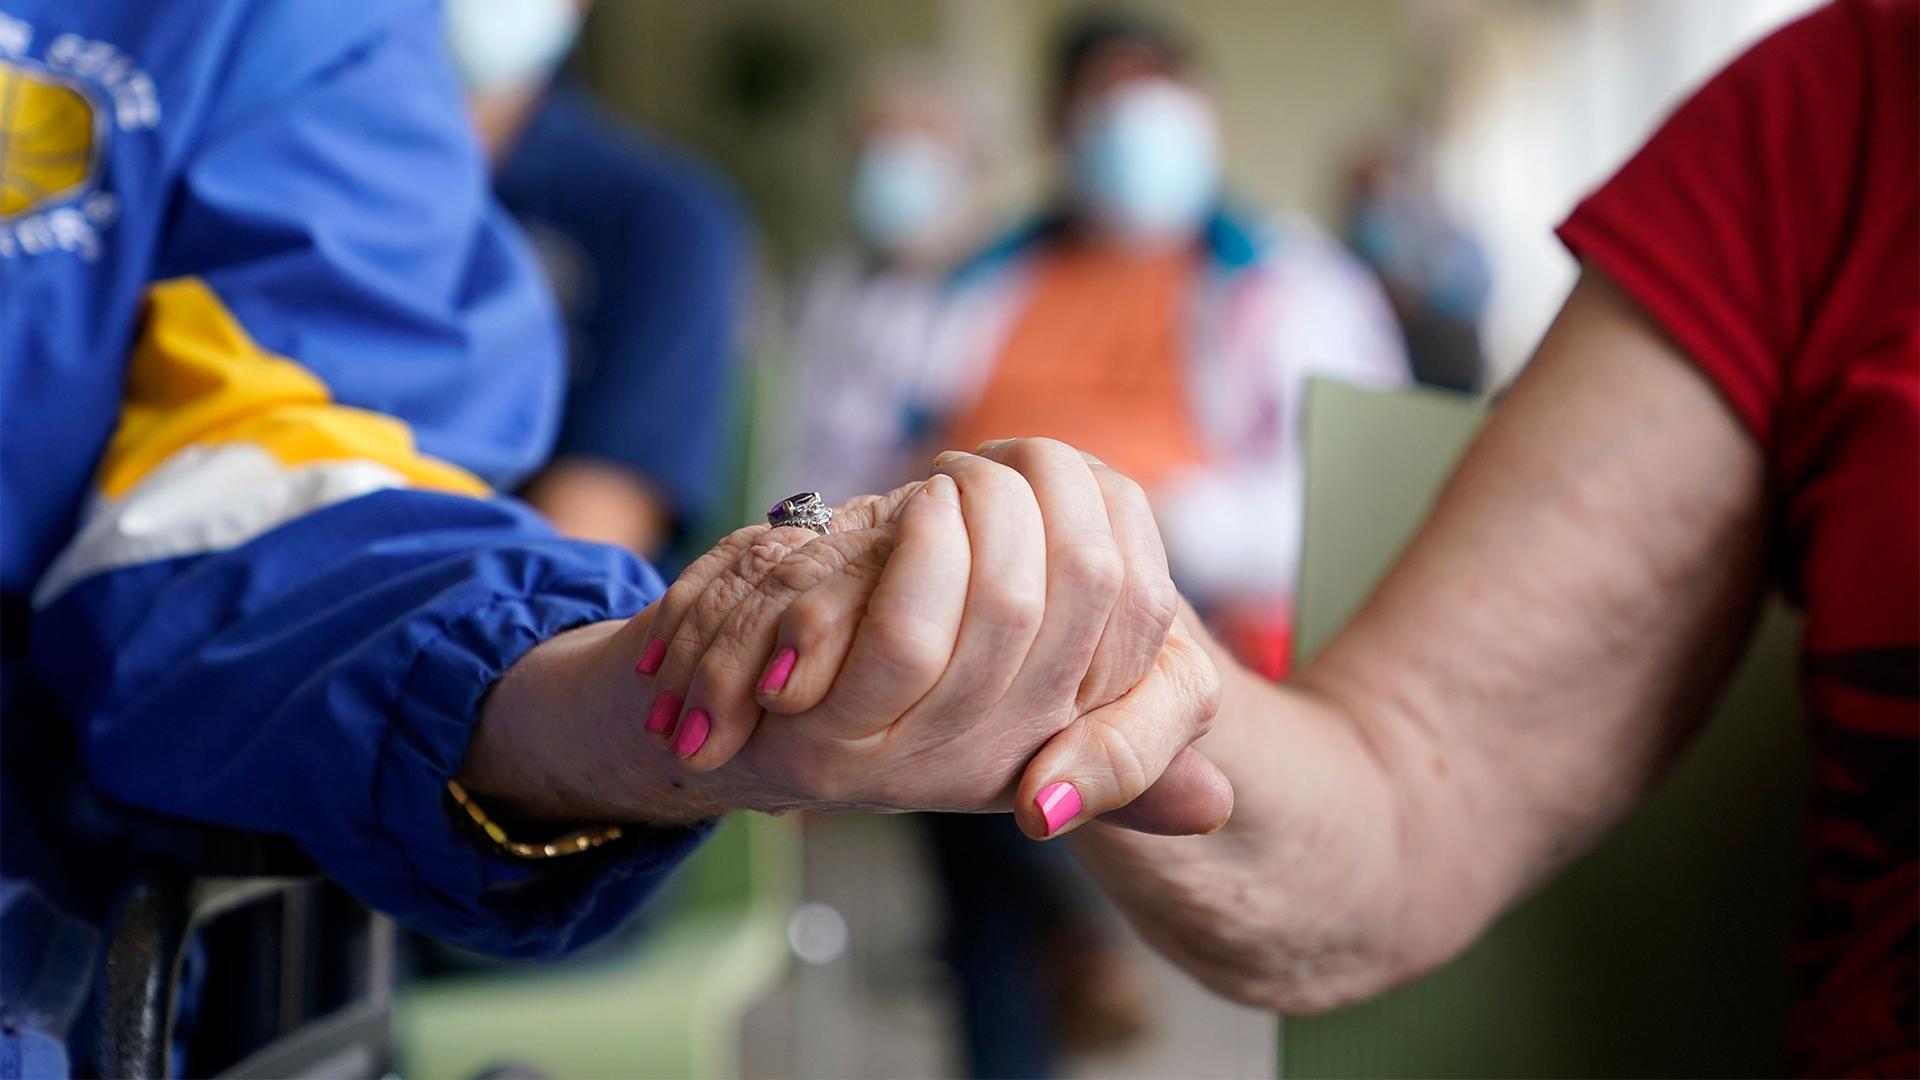 Residents Ken Fishman, 81, left, and Esther Wallach, 82, right, hold hands as they wait in line for the Pfizer-BioNTech COVID-19 vaccine at the The Palace assisted living facility in Coral Gables, Florida